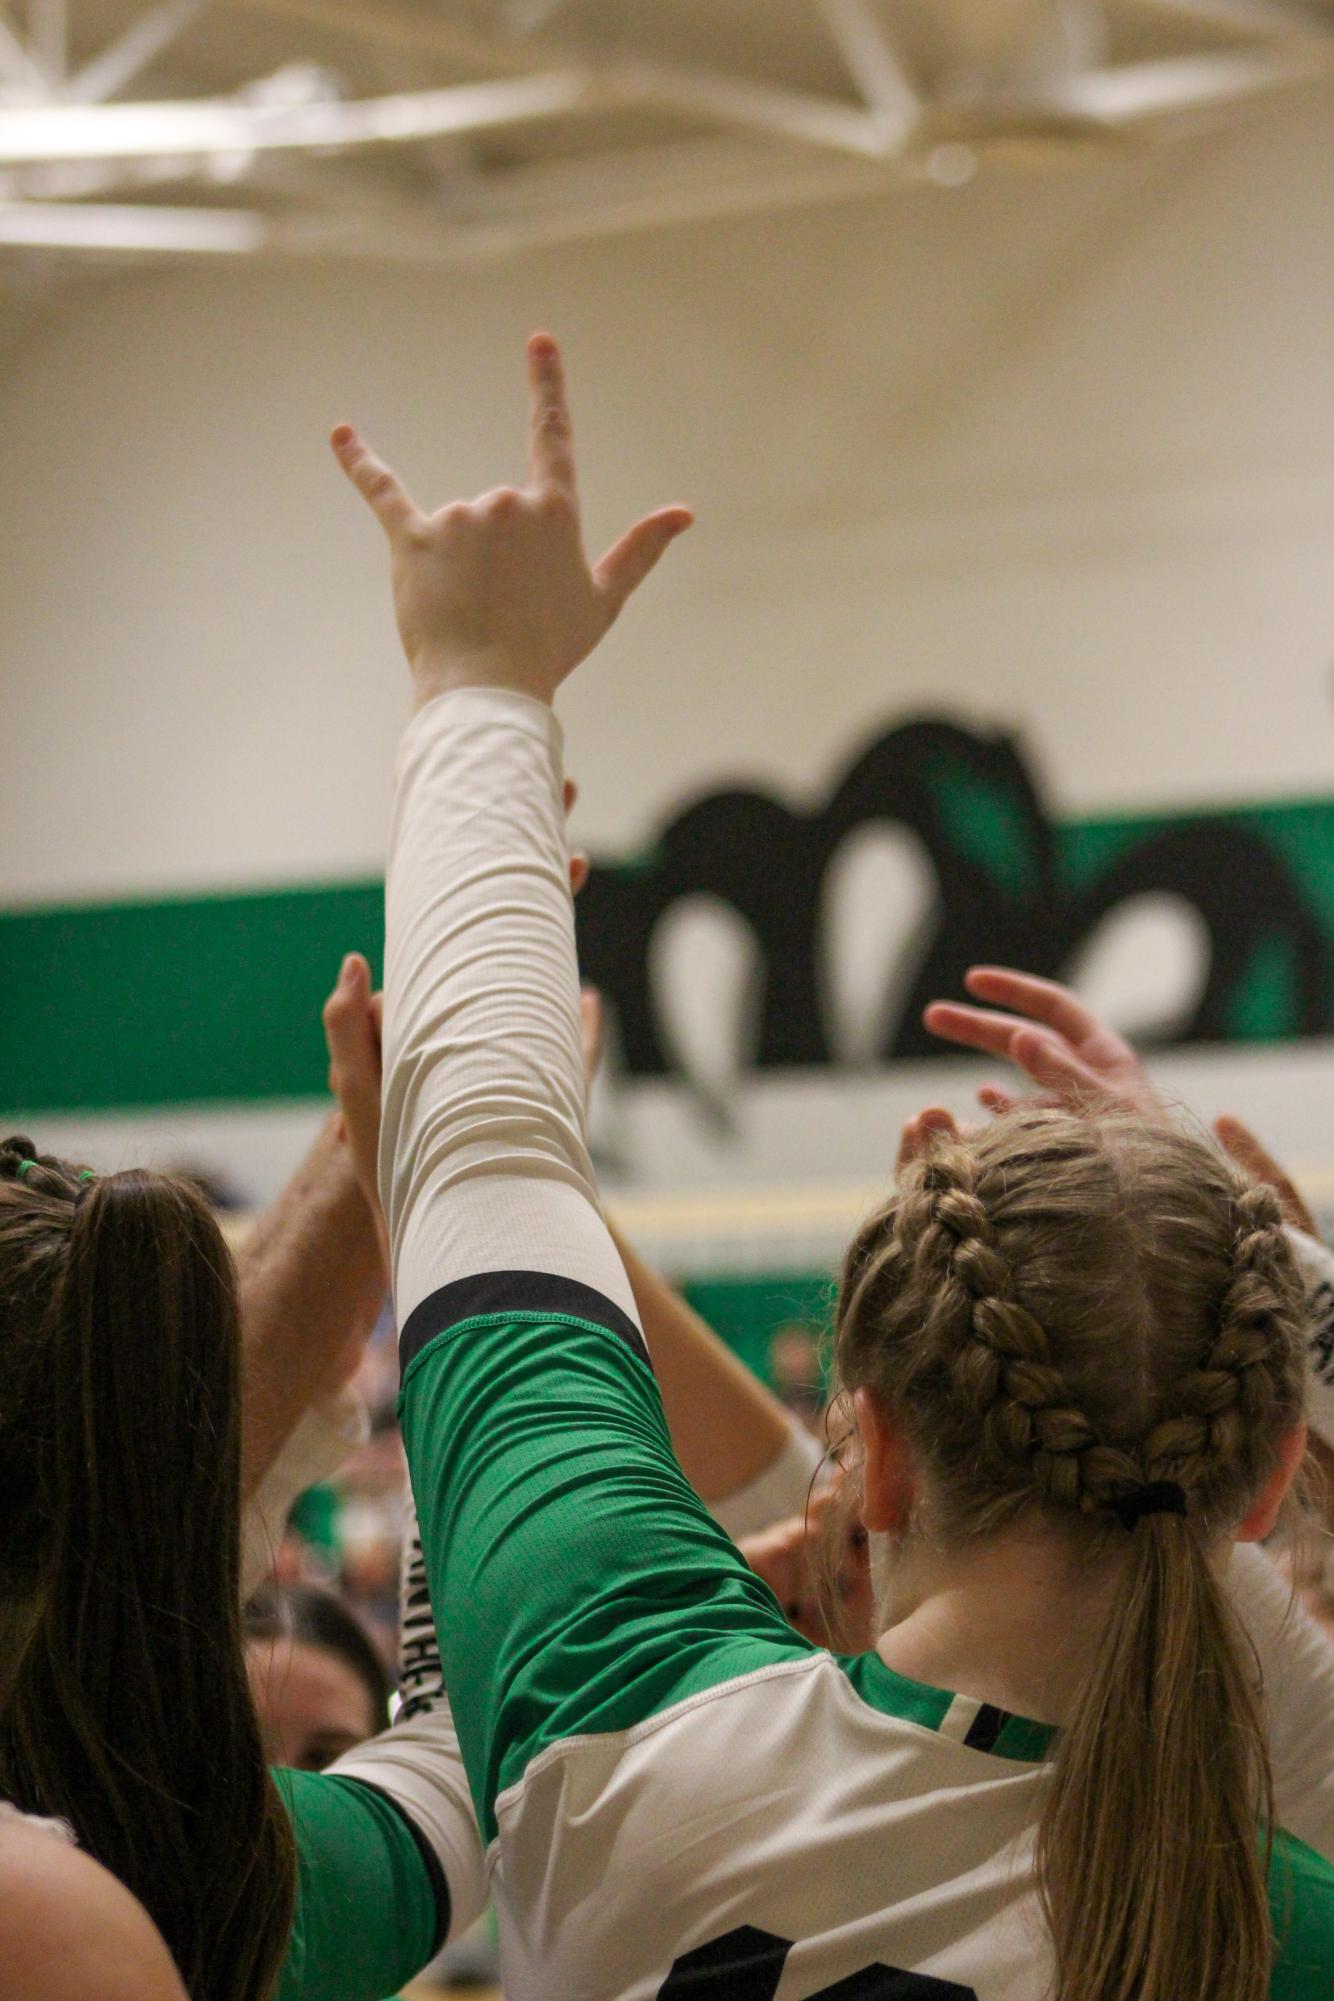 Variety+Volleyball+vs+Maize+South+%26+Campus+%28Photos+by+Liberty+Smith%29